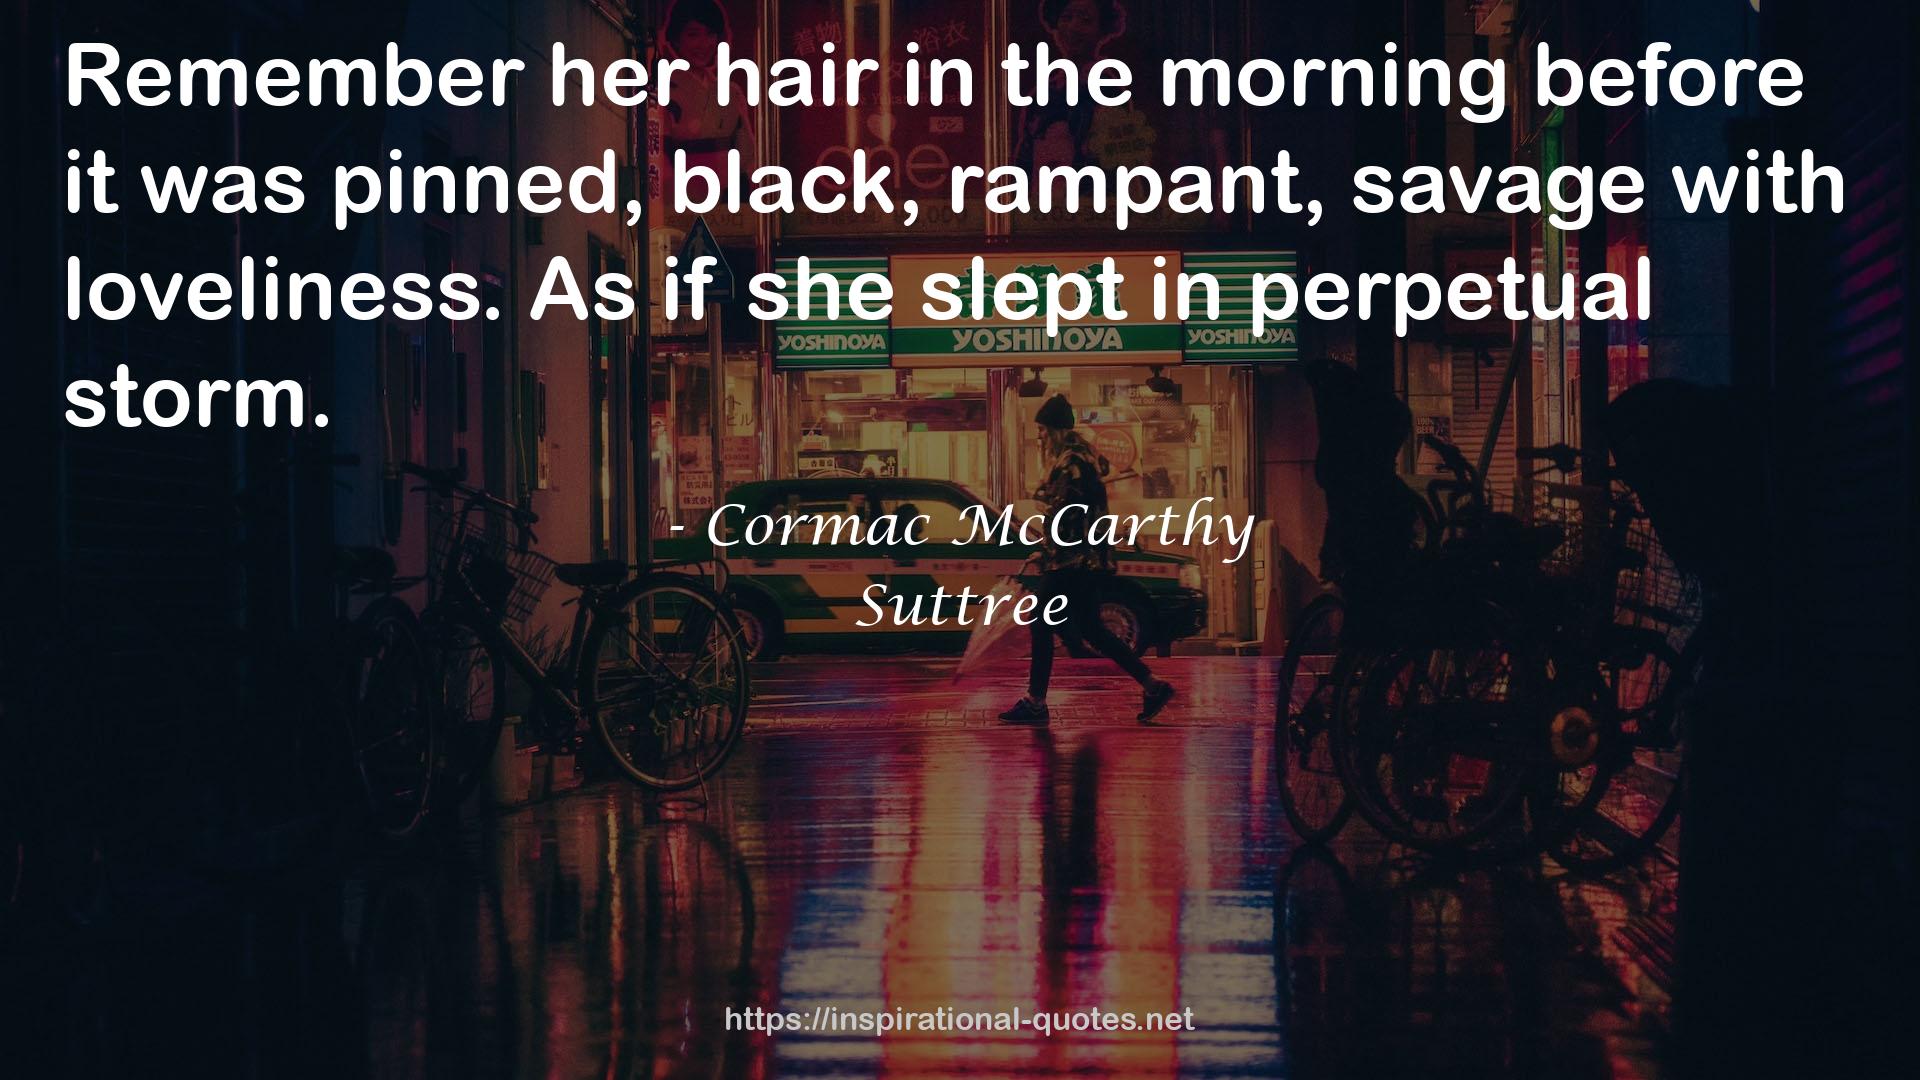 Cormac McCarthy quote : Remember her hair in the morning before it was pinned, black, rampant, savage with loveliness. As if she slept in perpetual storm.